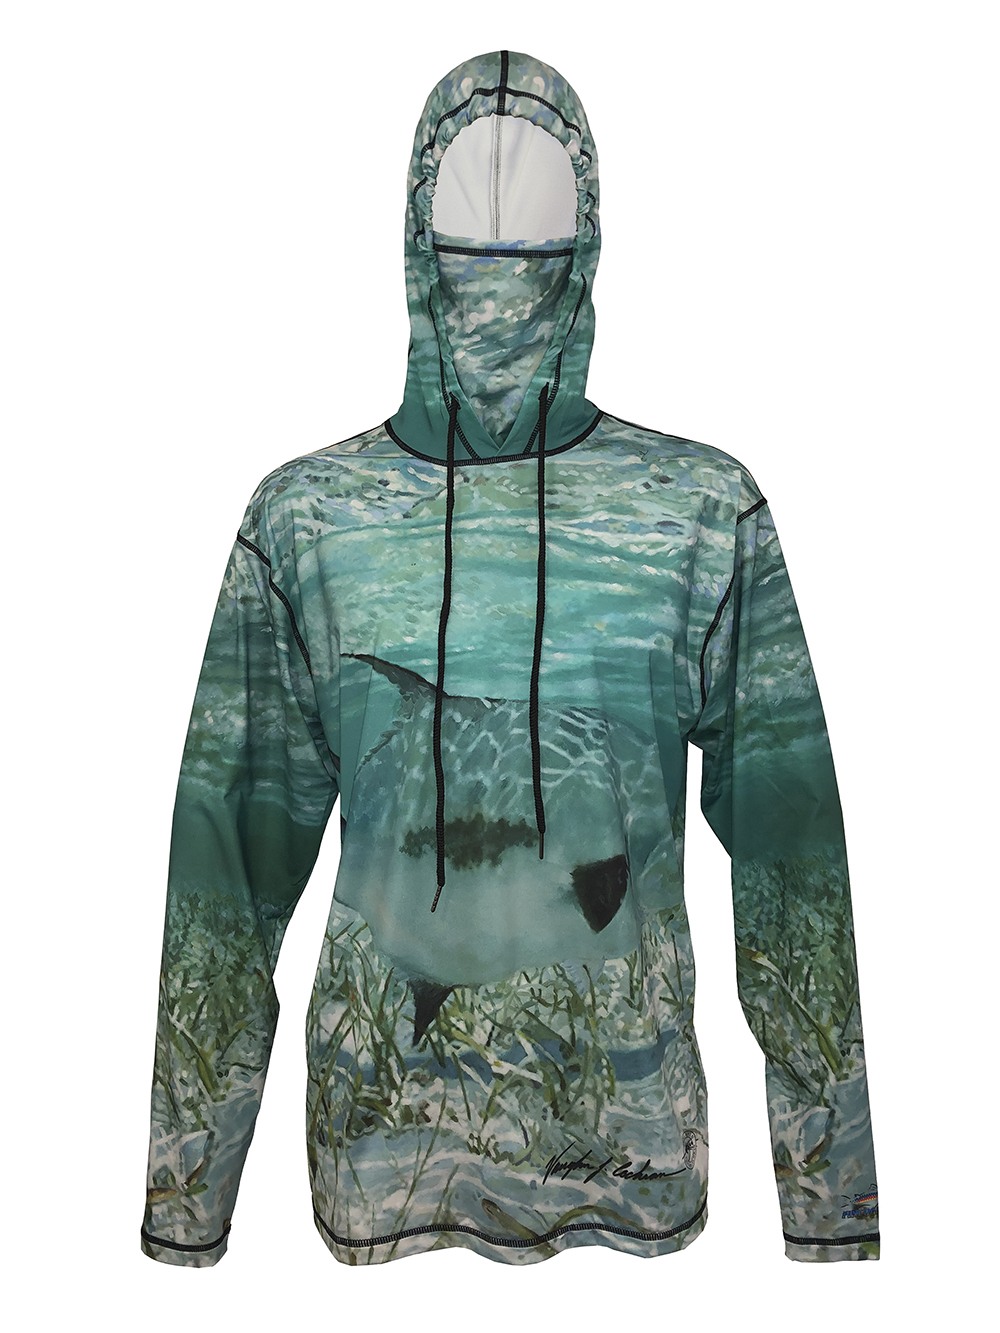 Permit Saltwater Fishing Hoodies - Saltwater on the Fly Outdoor Apparel Hike